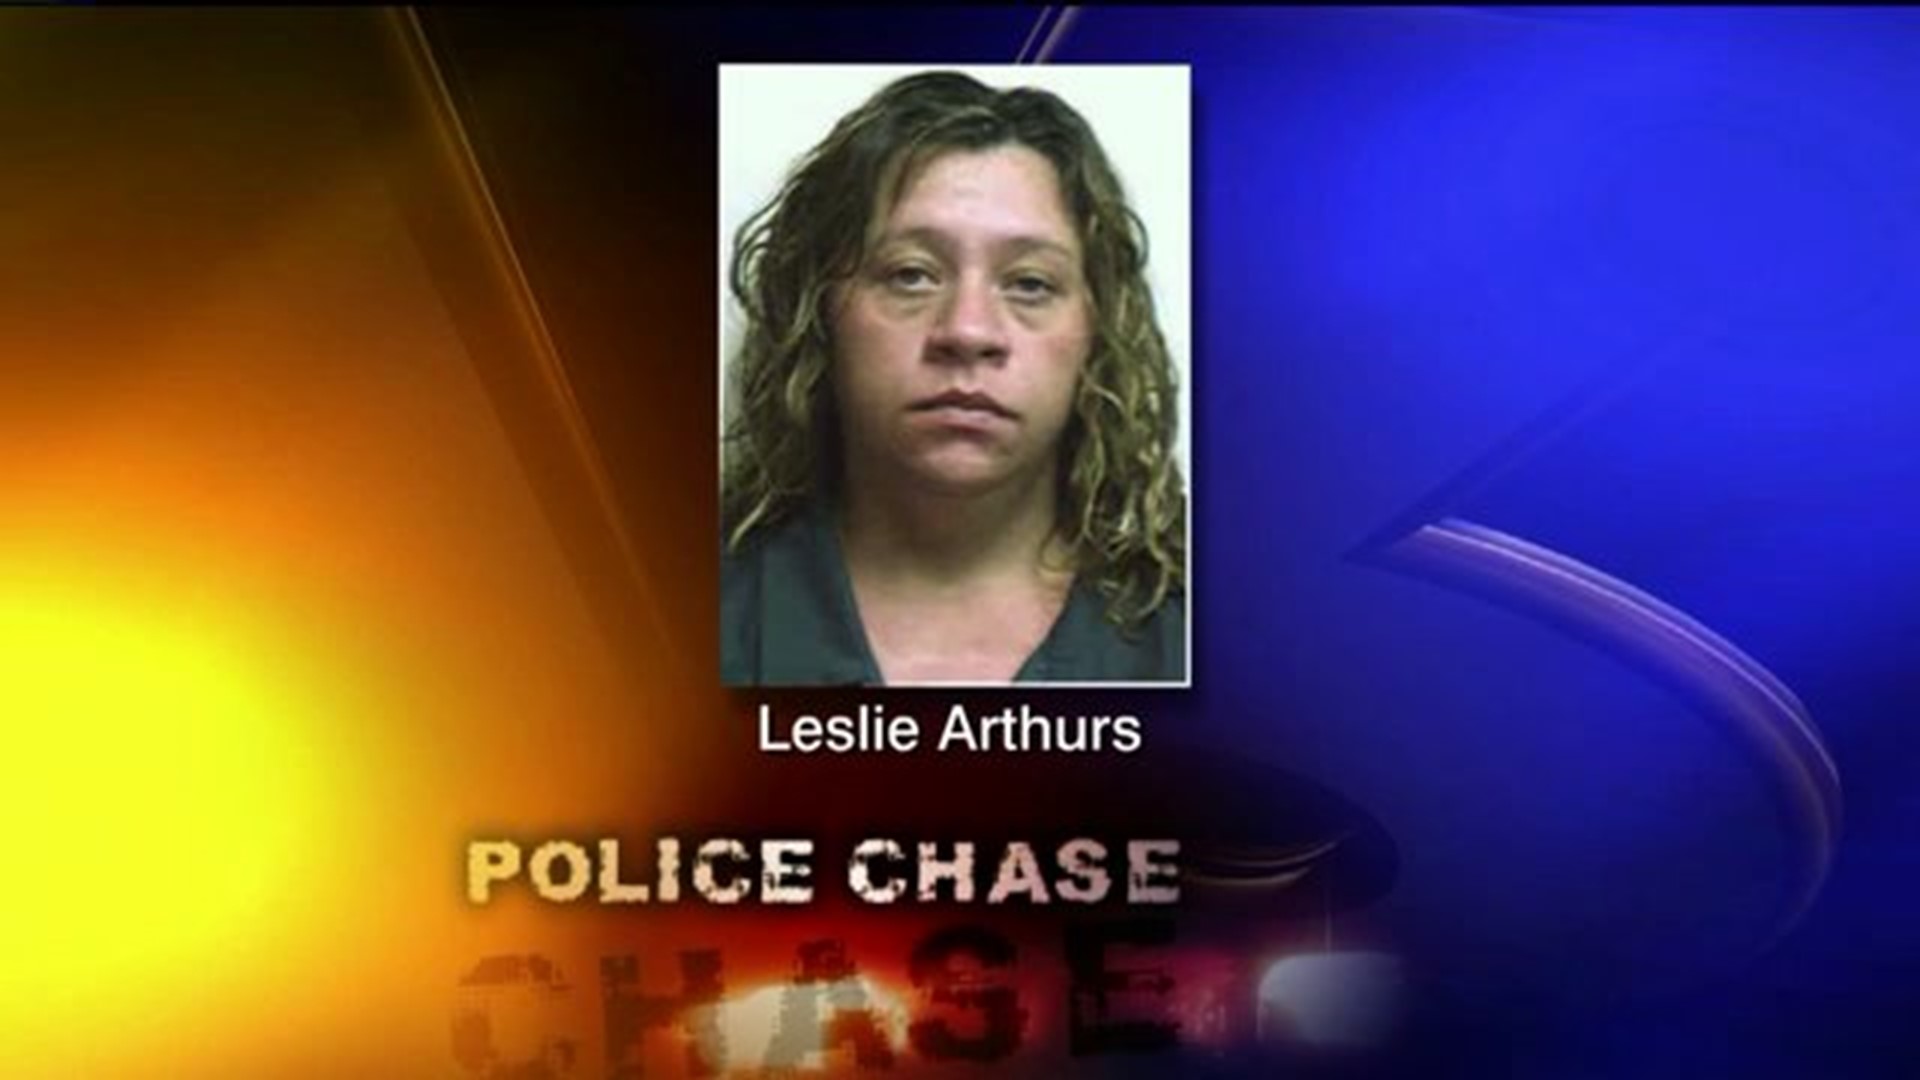 Woman Who Led Chase While Pregnant Sentenced